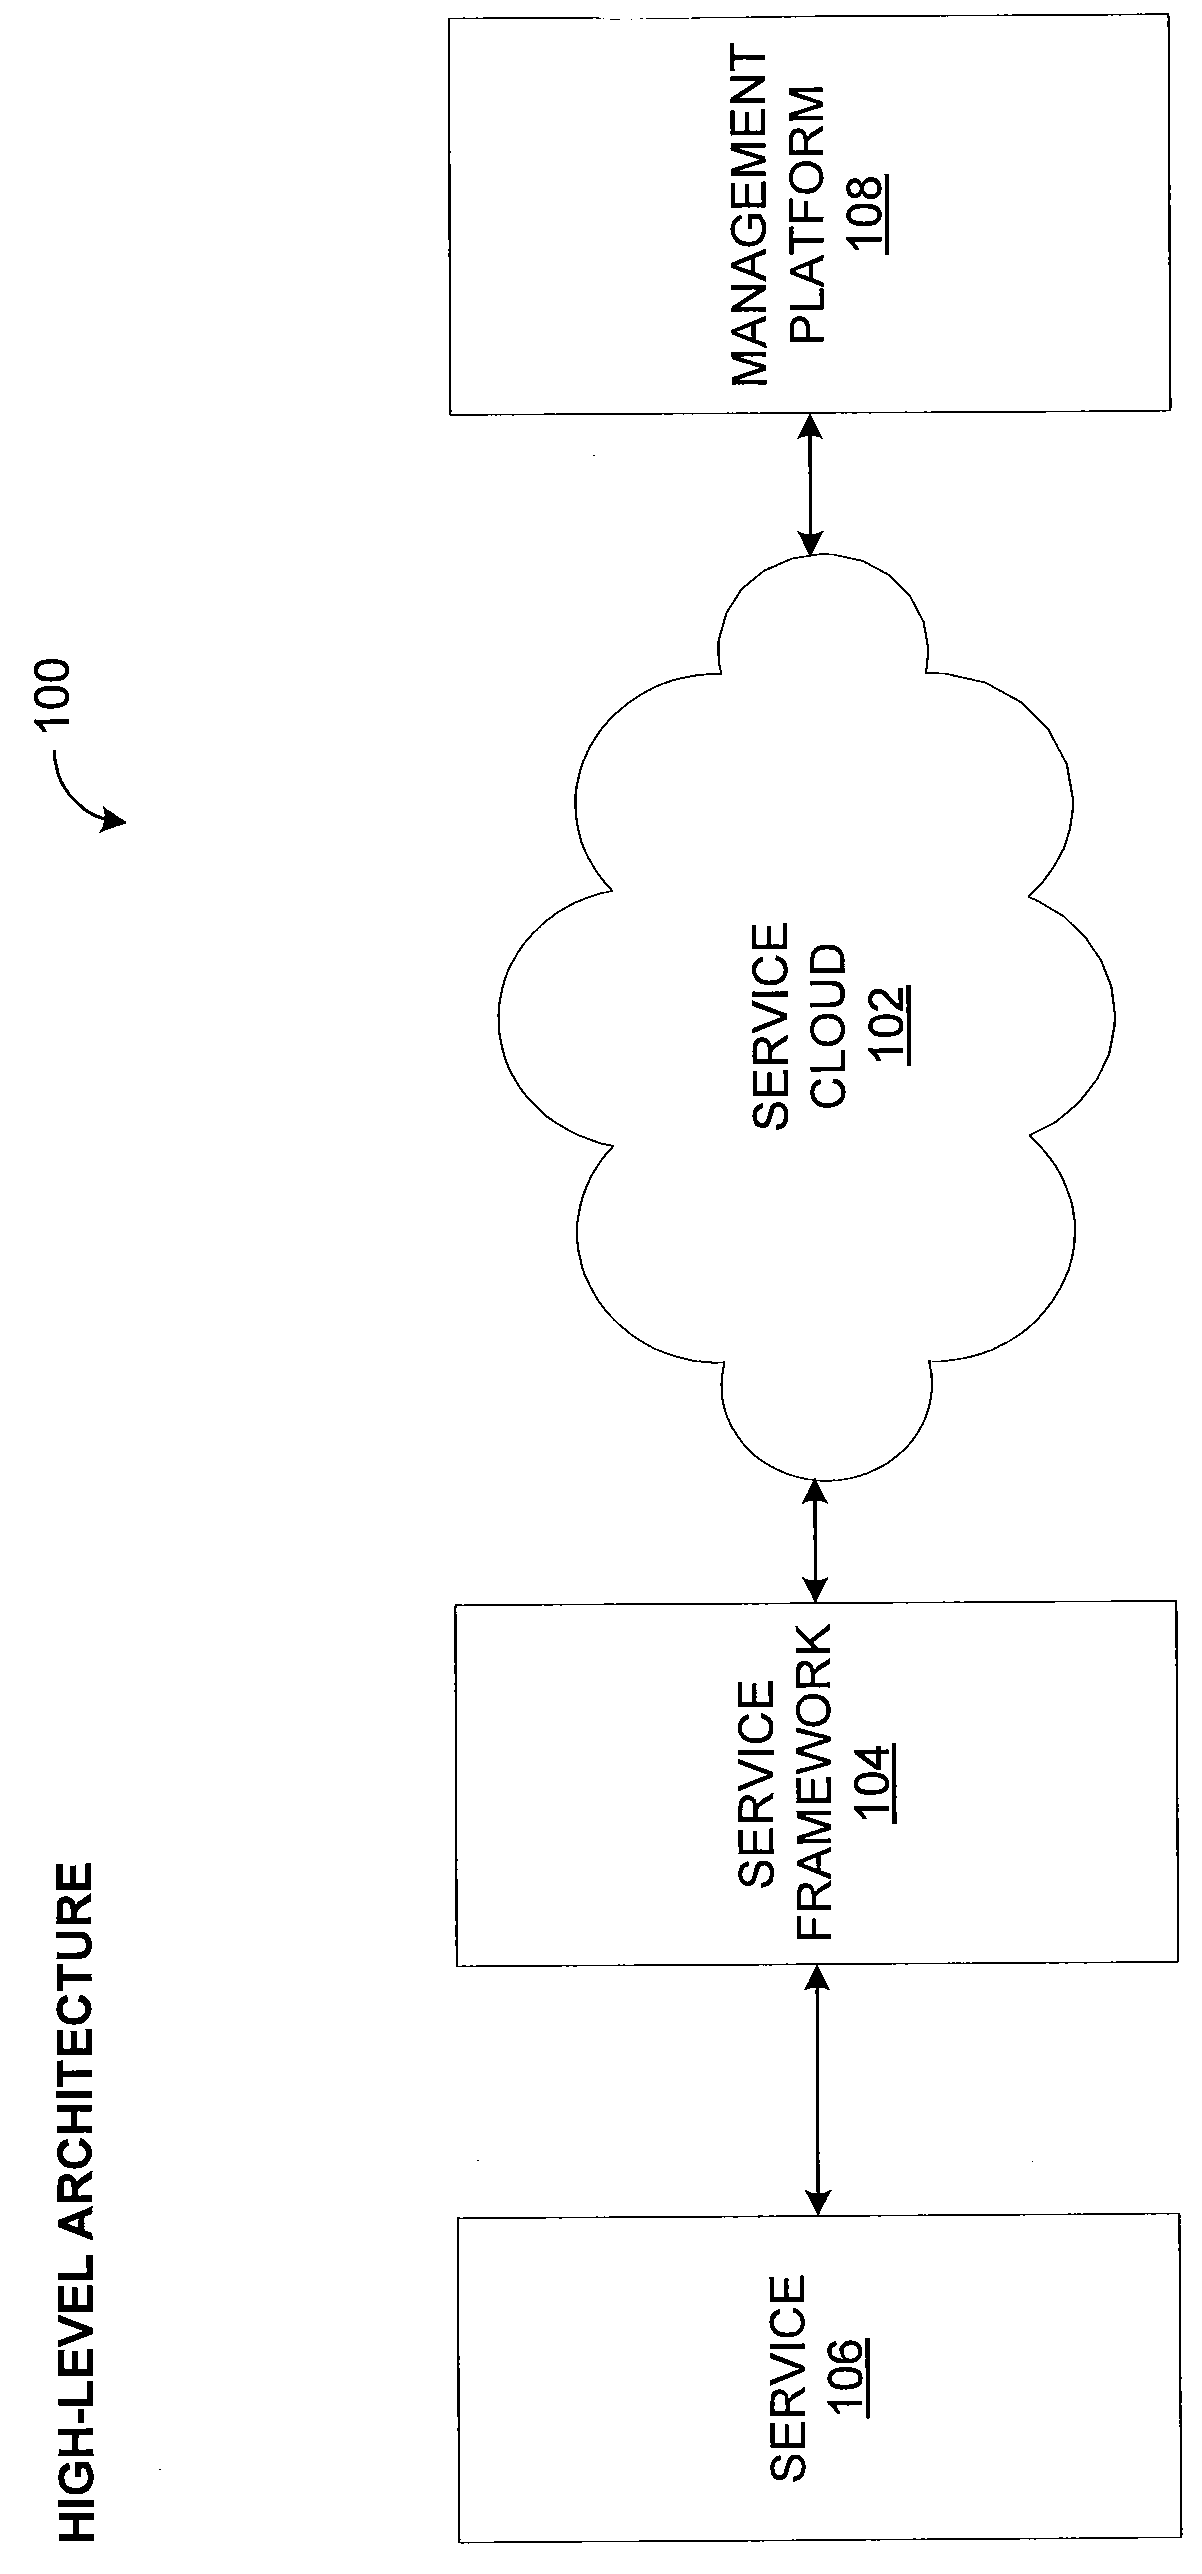 Systems and methods for configuring and managing computing resources to provide highly-scalable services